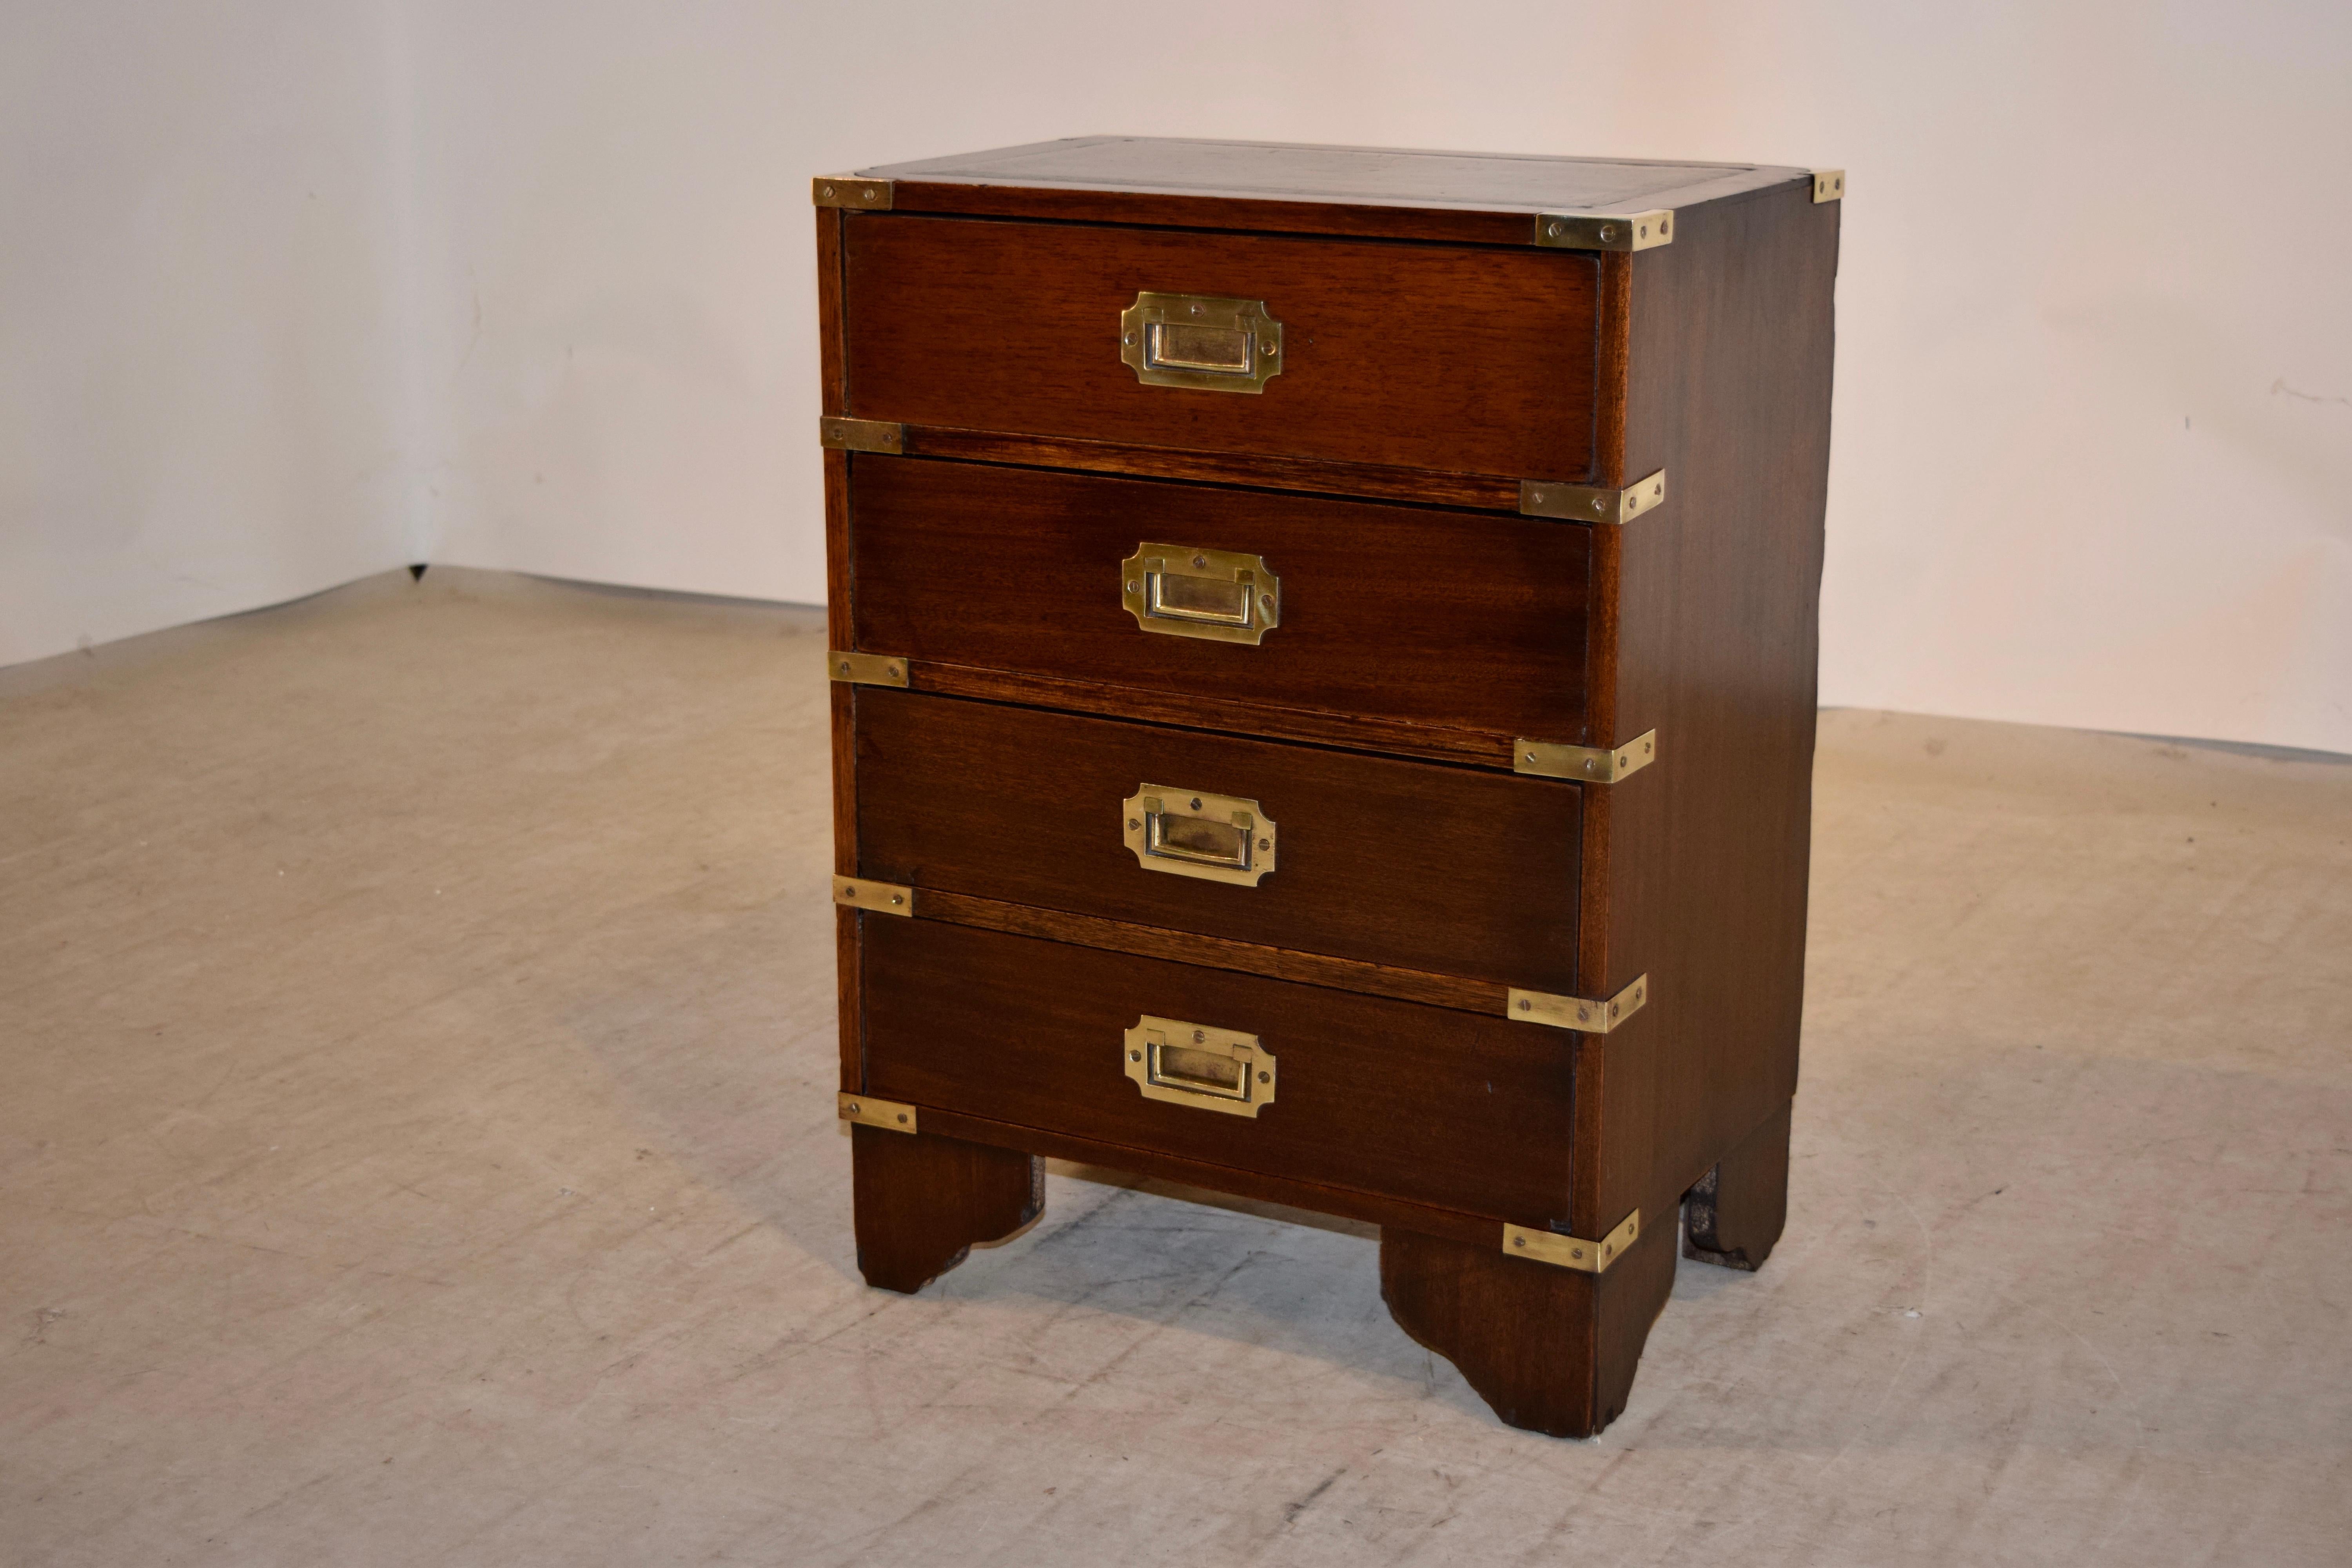 English mahogany small campaign chest with brass banding and hardware. Raised on bracket feet.